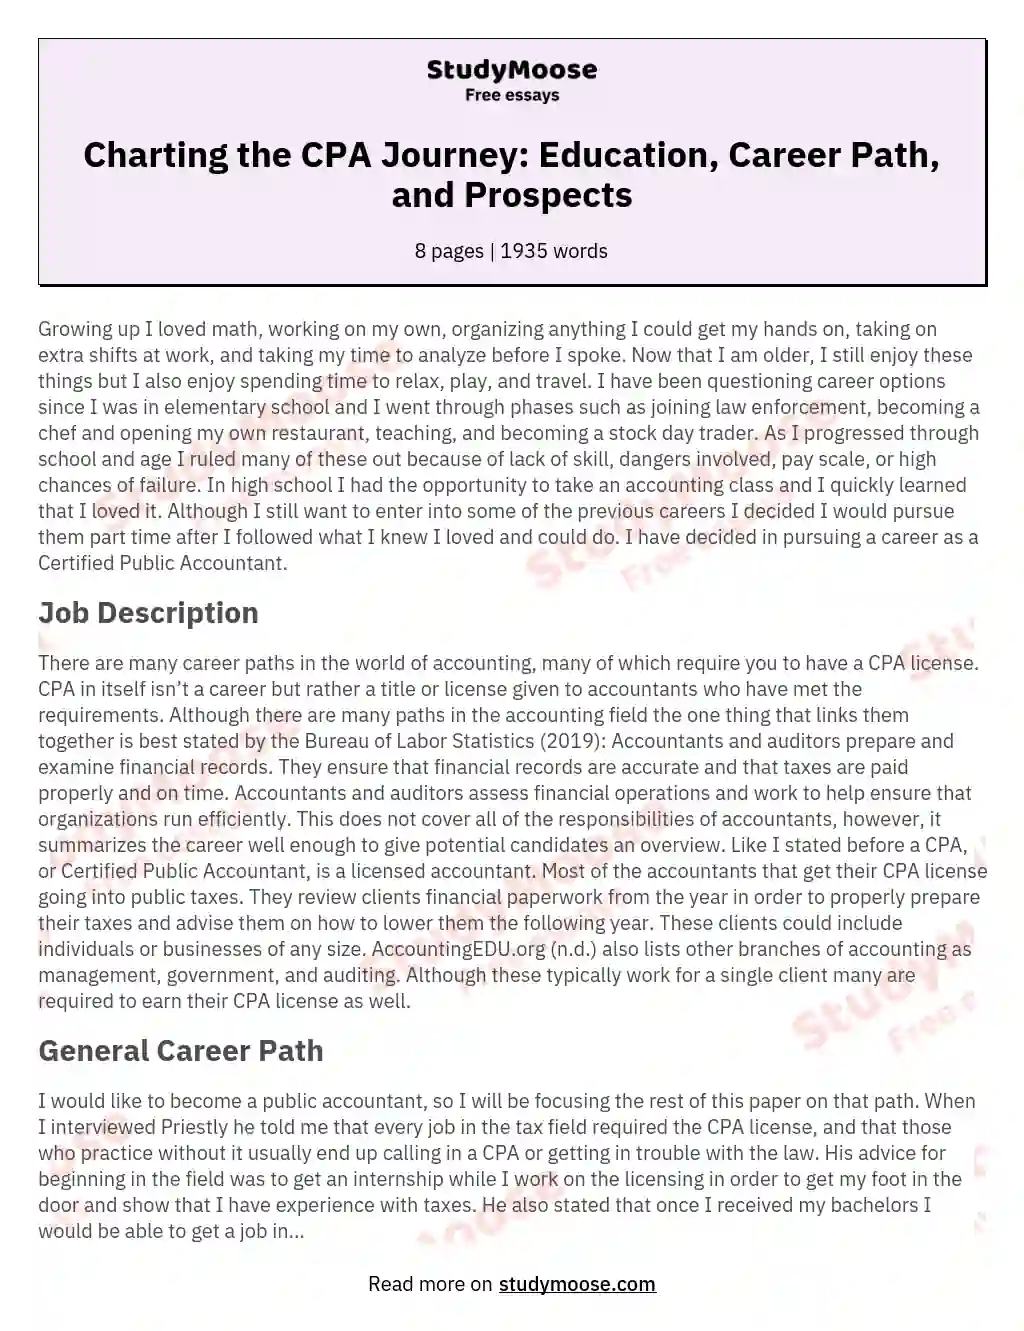 write an essay about my dream career